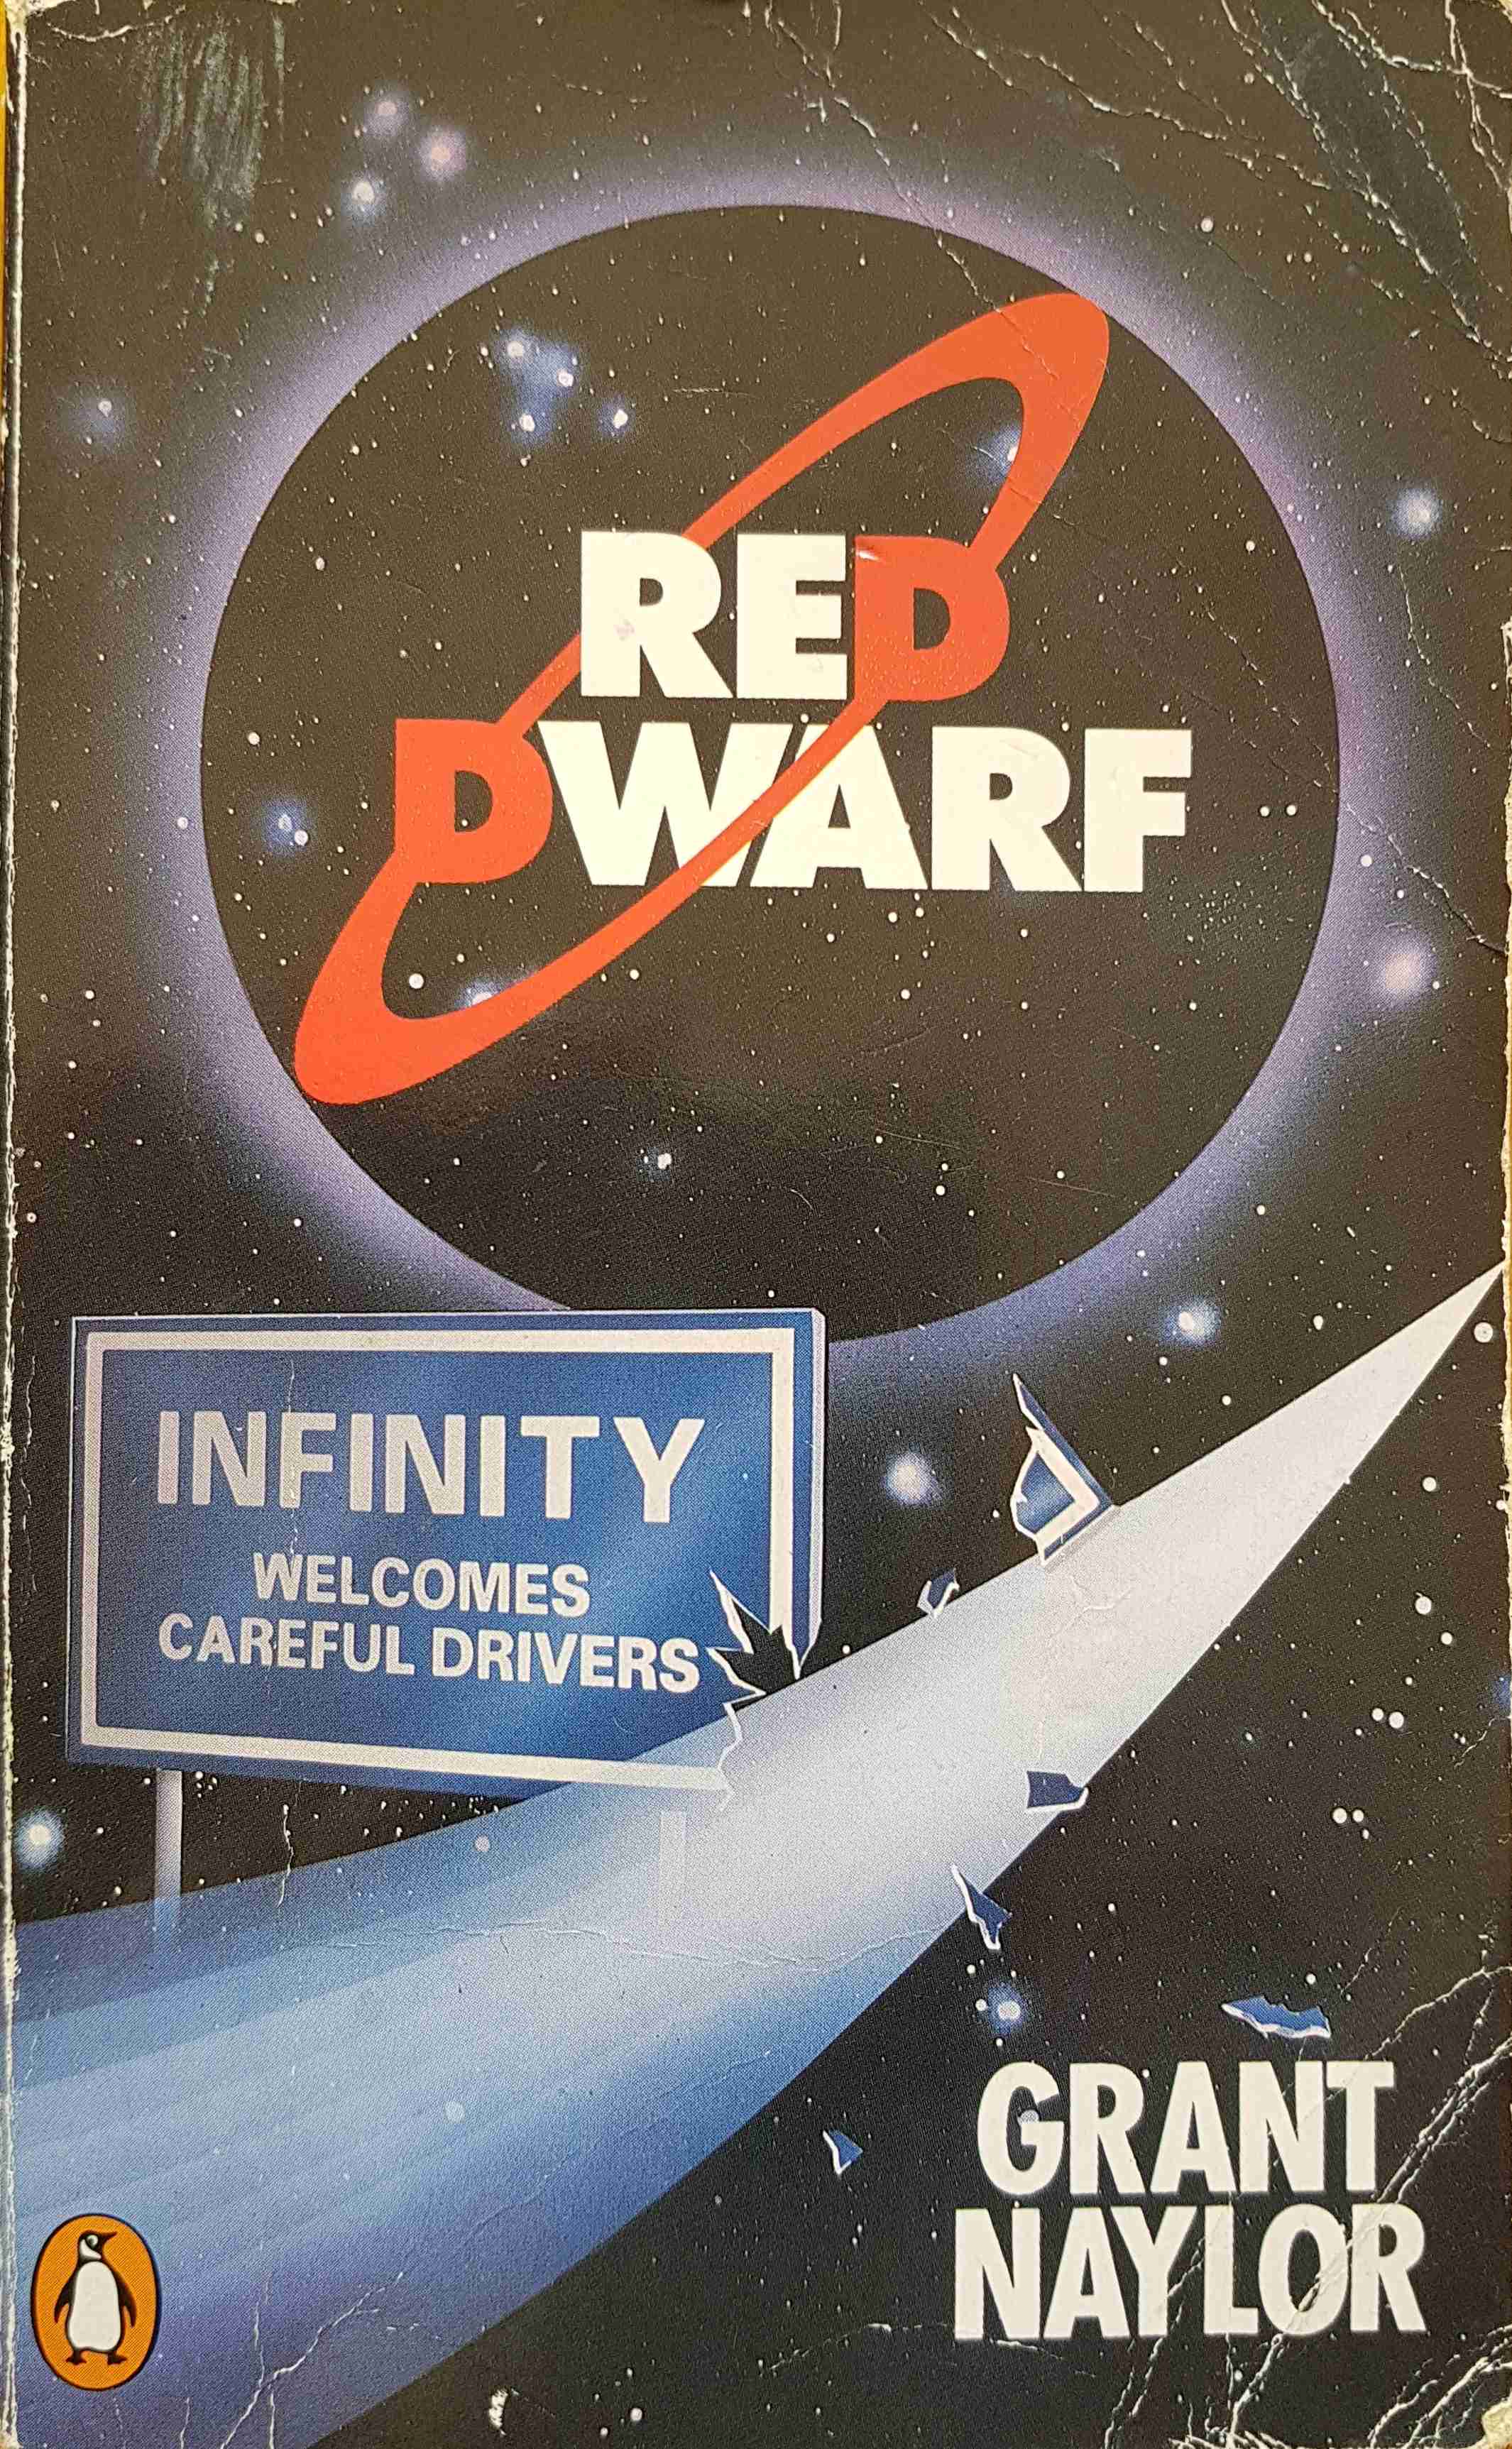 Picture of Red dwarf - The full story by artist Grant Naylor from the BBC books - Records and Tapes library